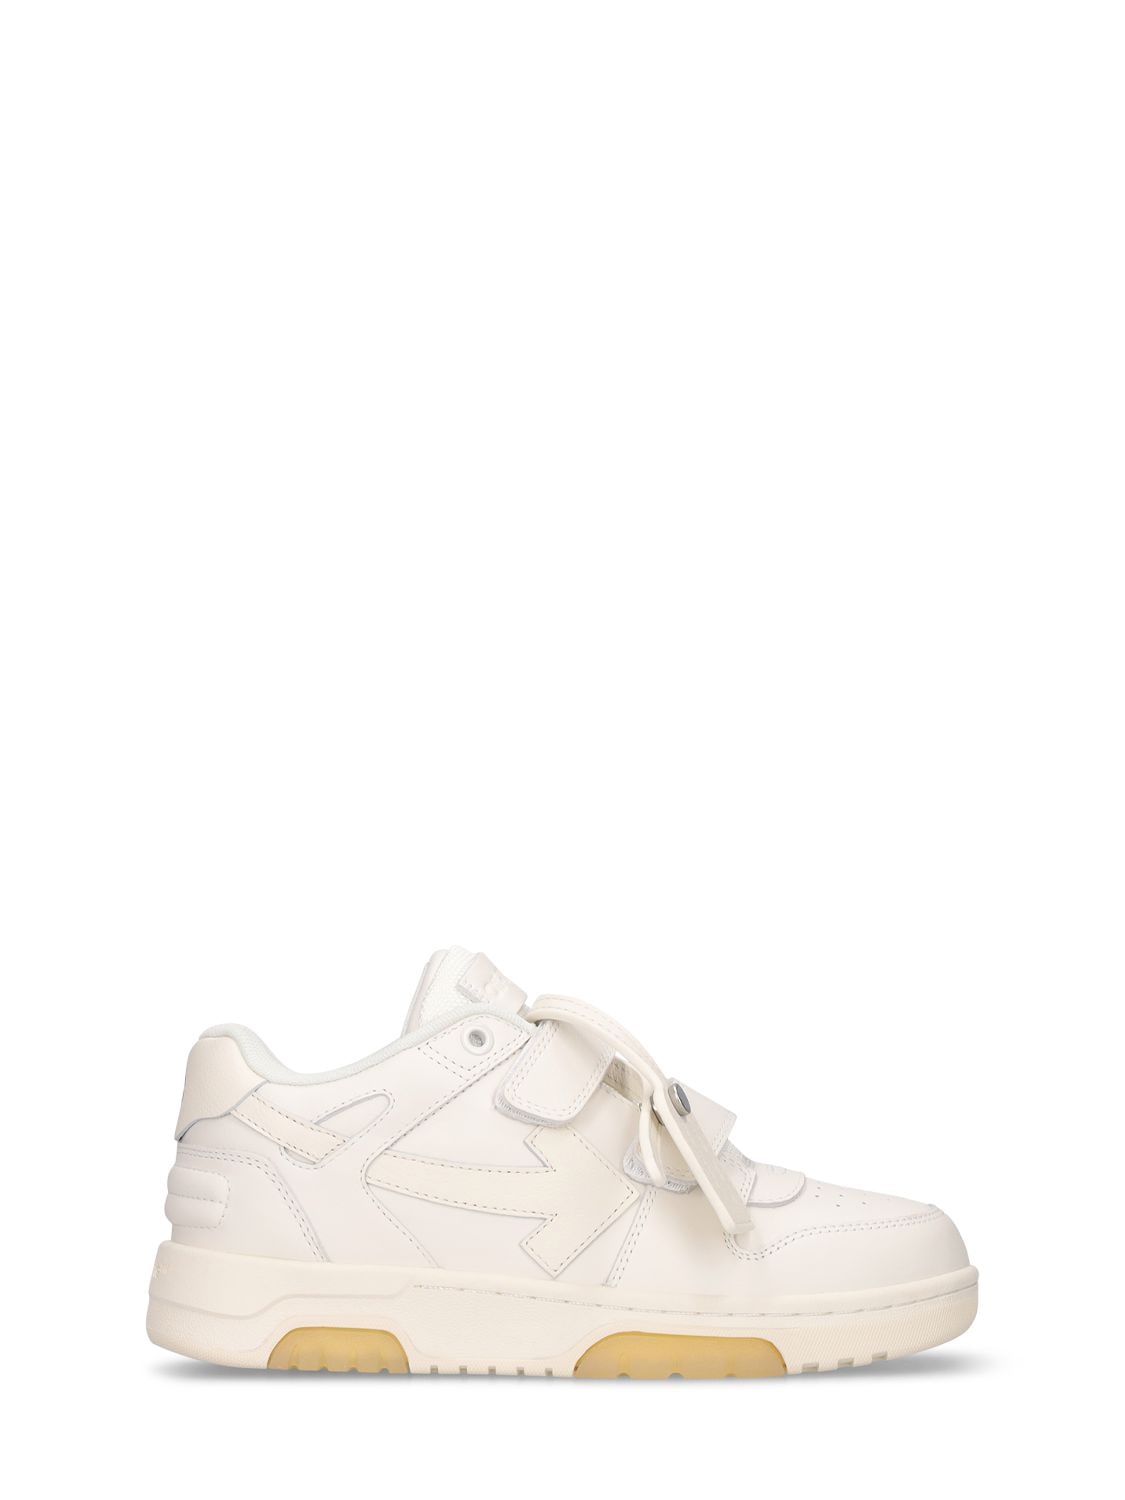 OFF-WHITE OUT OF OFFICE LEATHER STRAP SNEAKERS